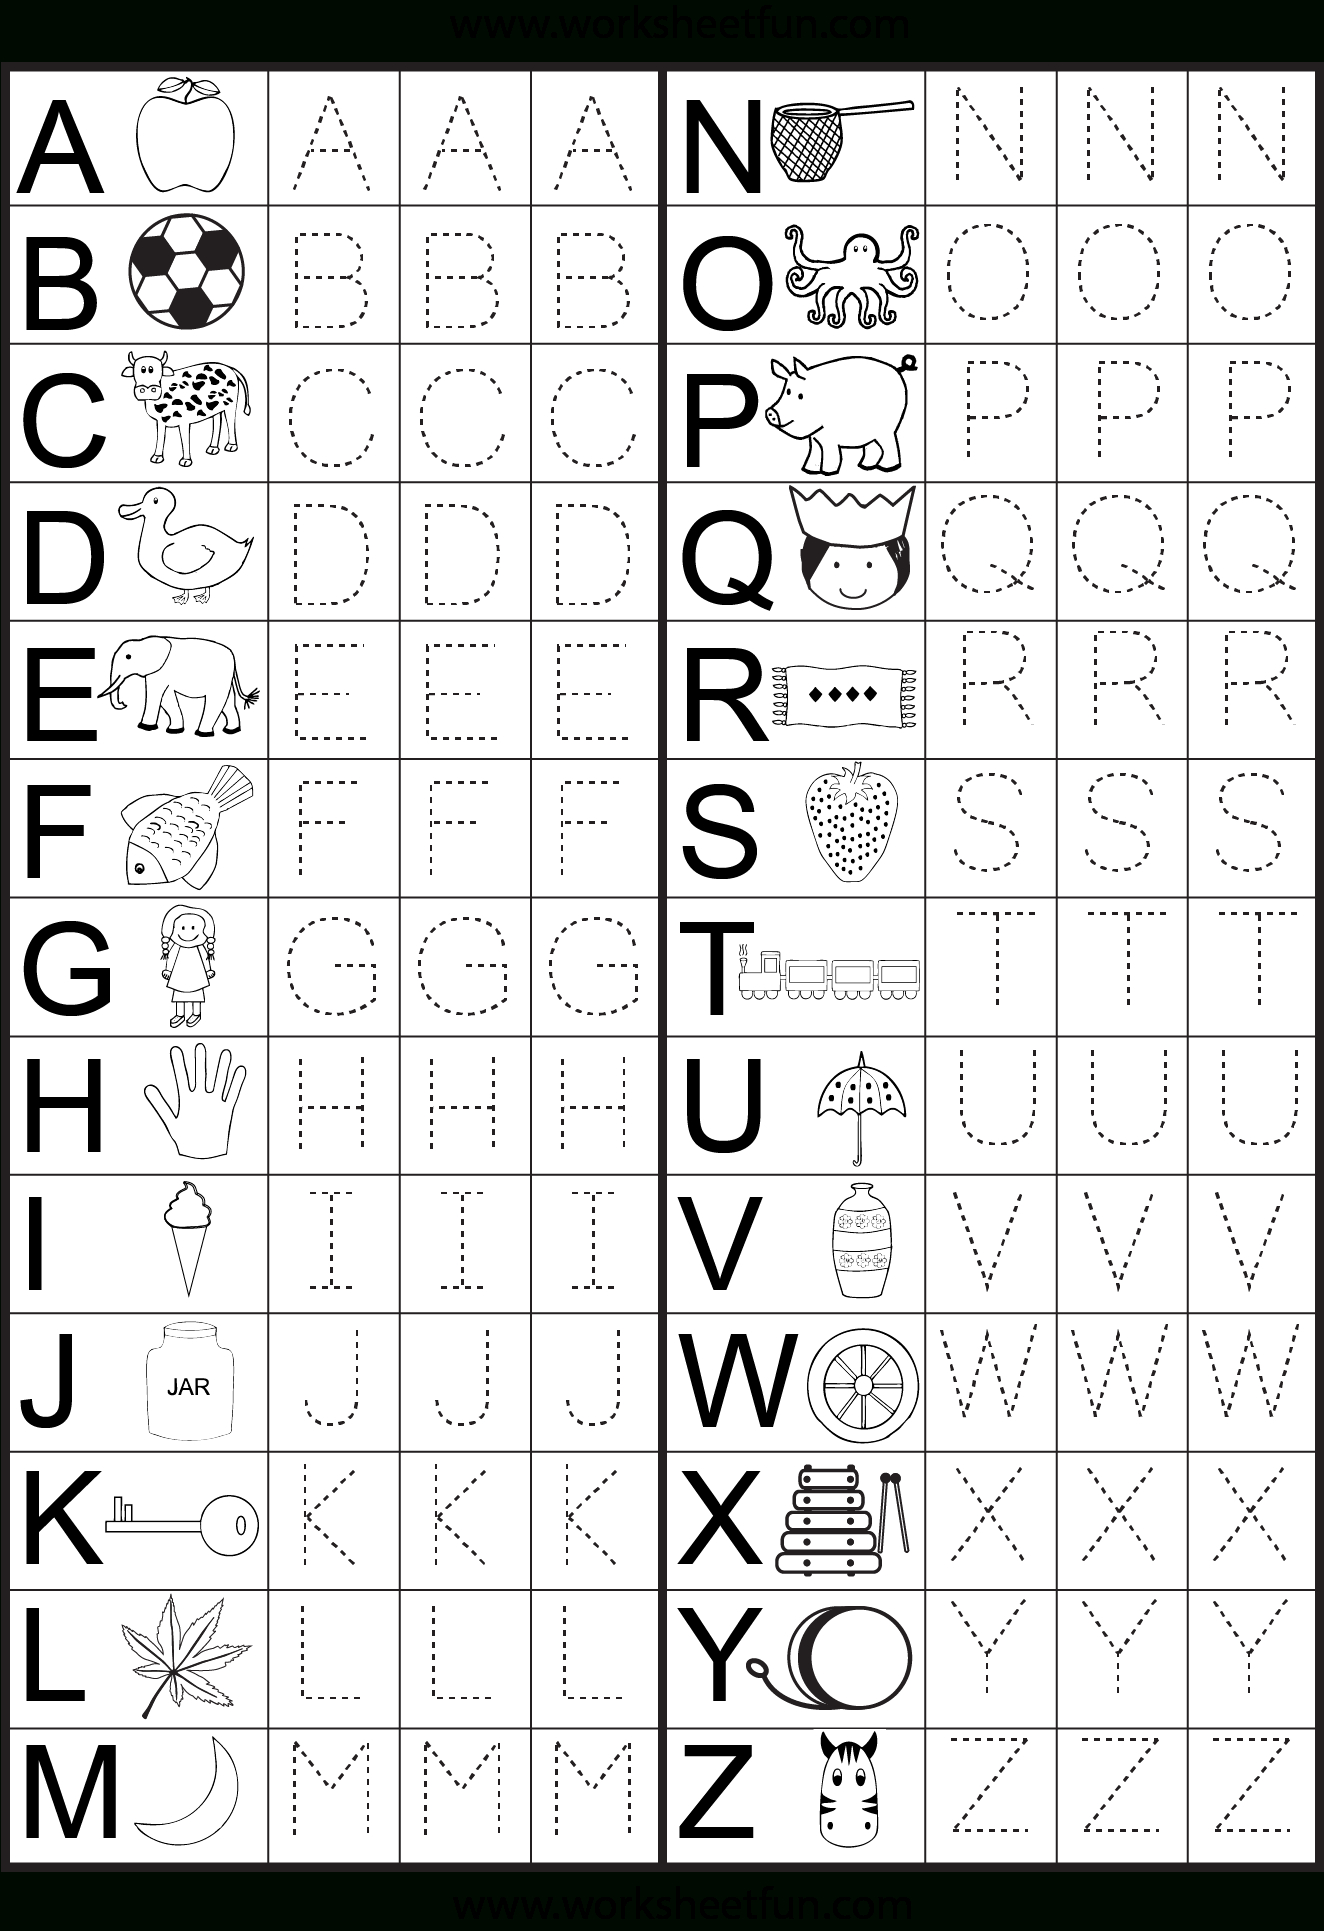 Save Website, Worksheets Free. | For The Classroom with regard to Alphabet Worksheets Kindergarten Free